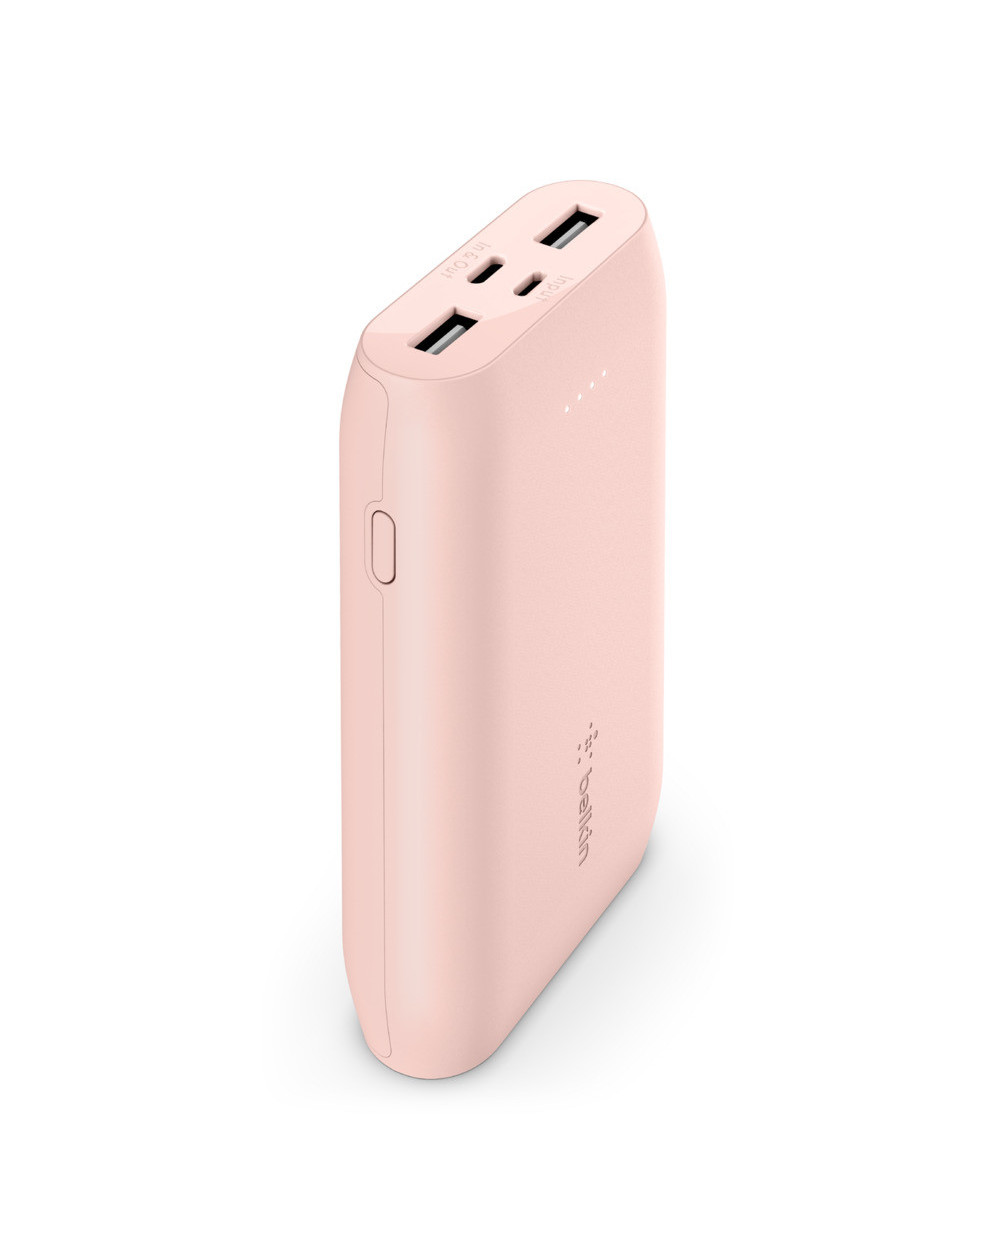 POWERBANK 10K 15W USB-C IN/OUT + MICRO USB IN - ROSA - C&C Shop